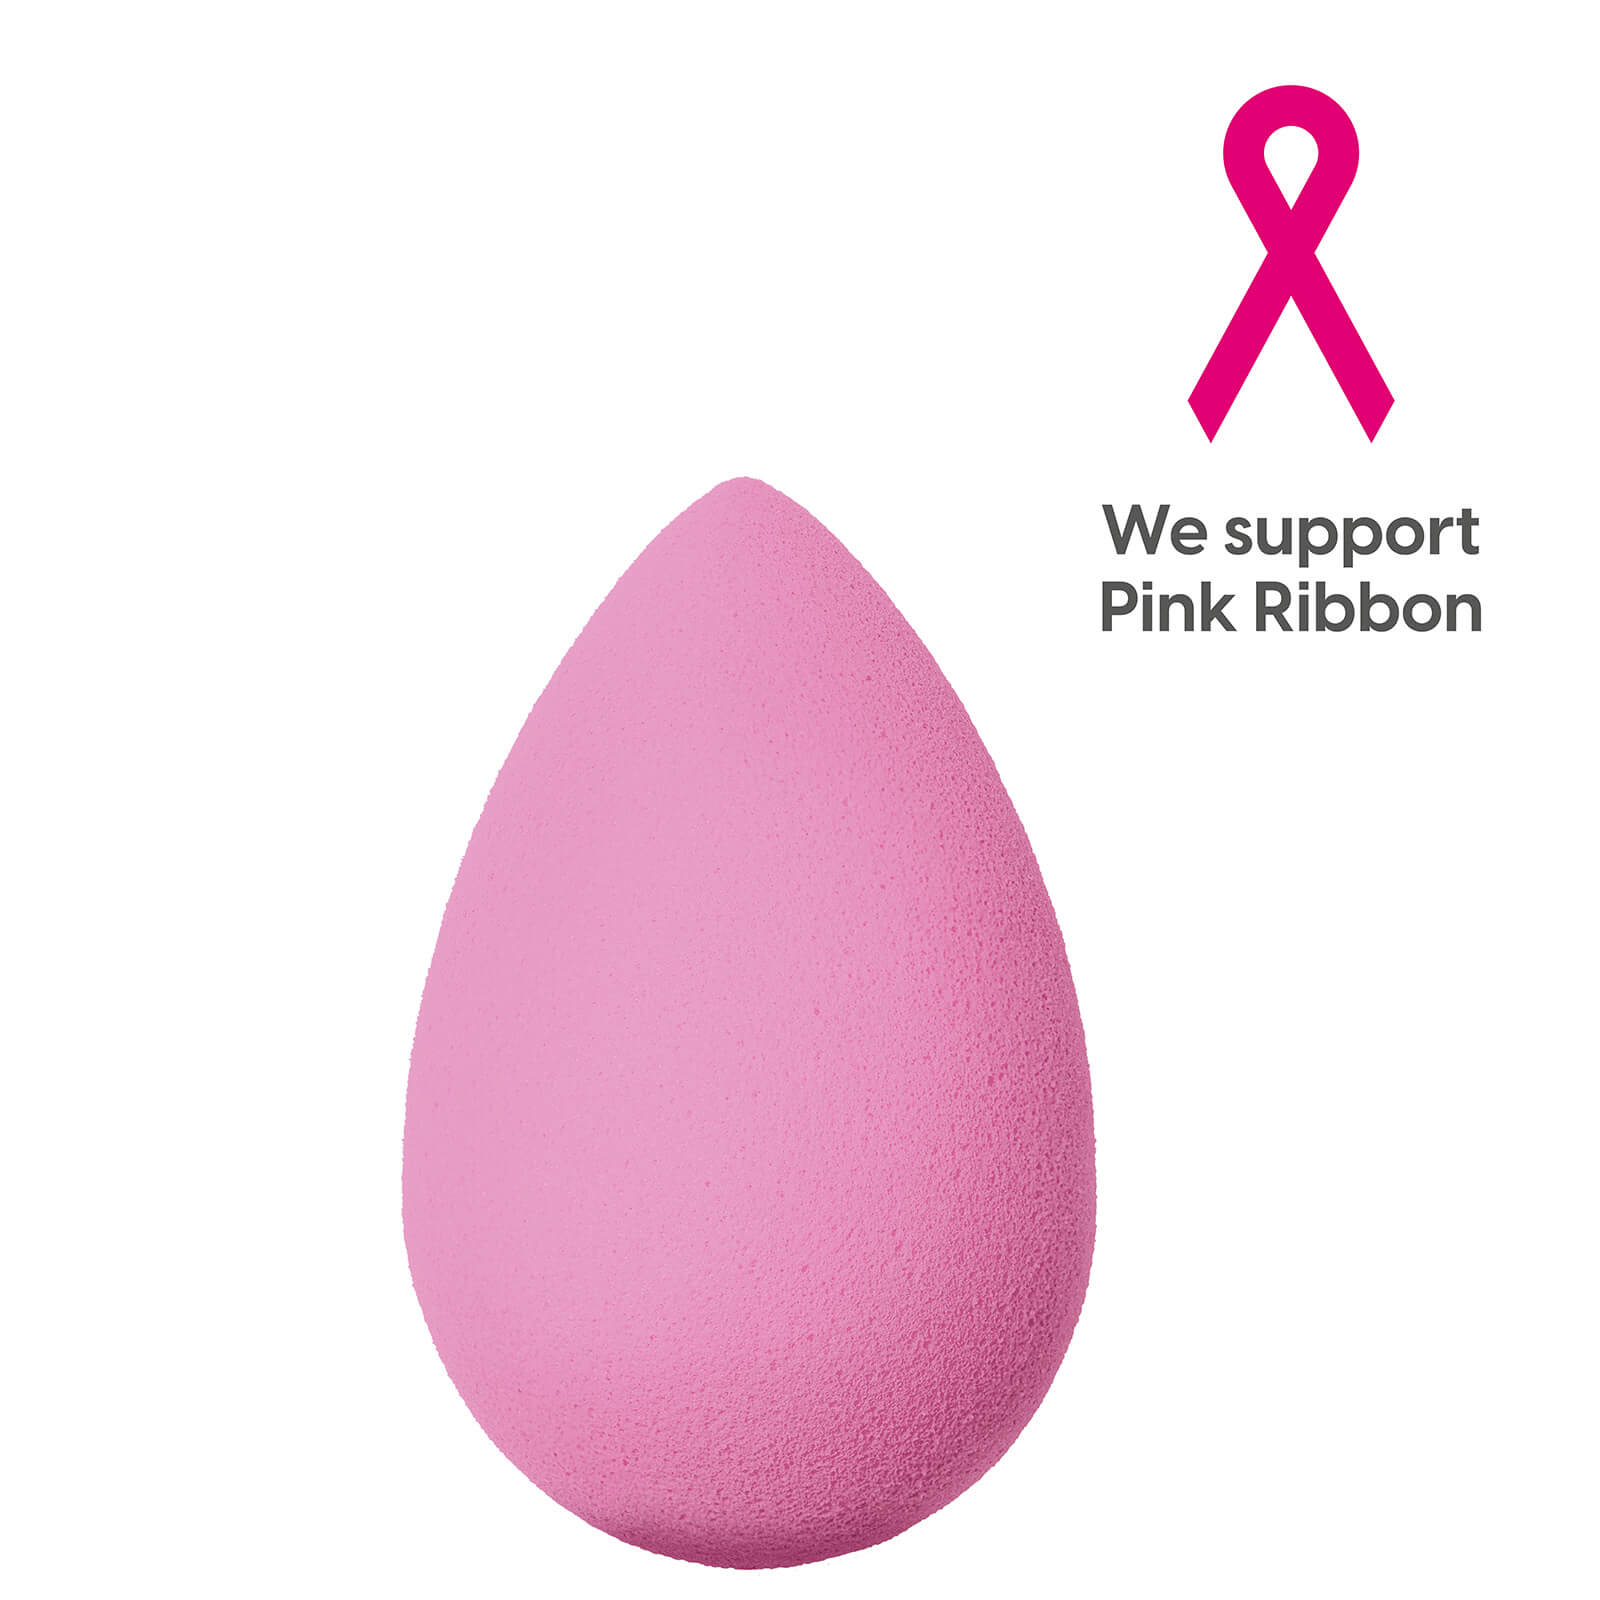 We support pink ribbon